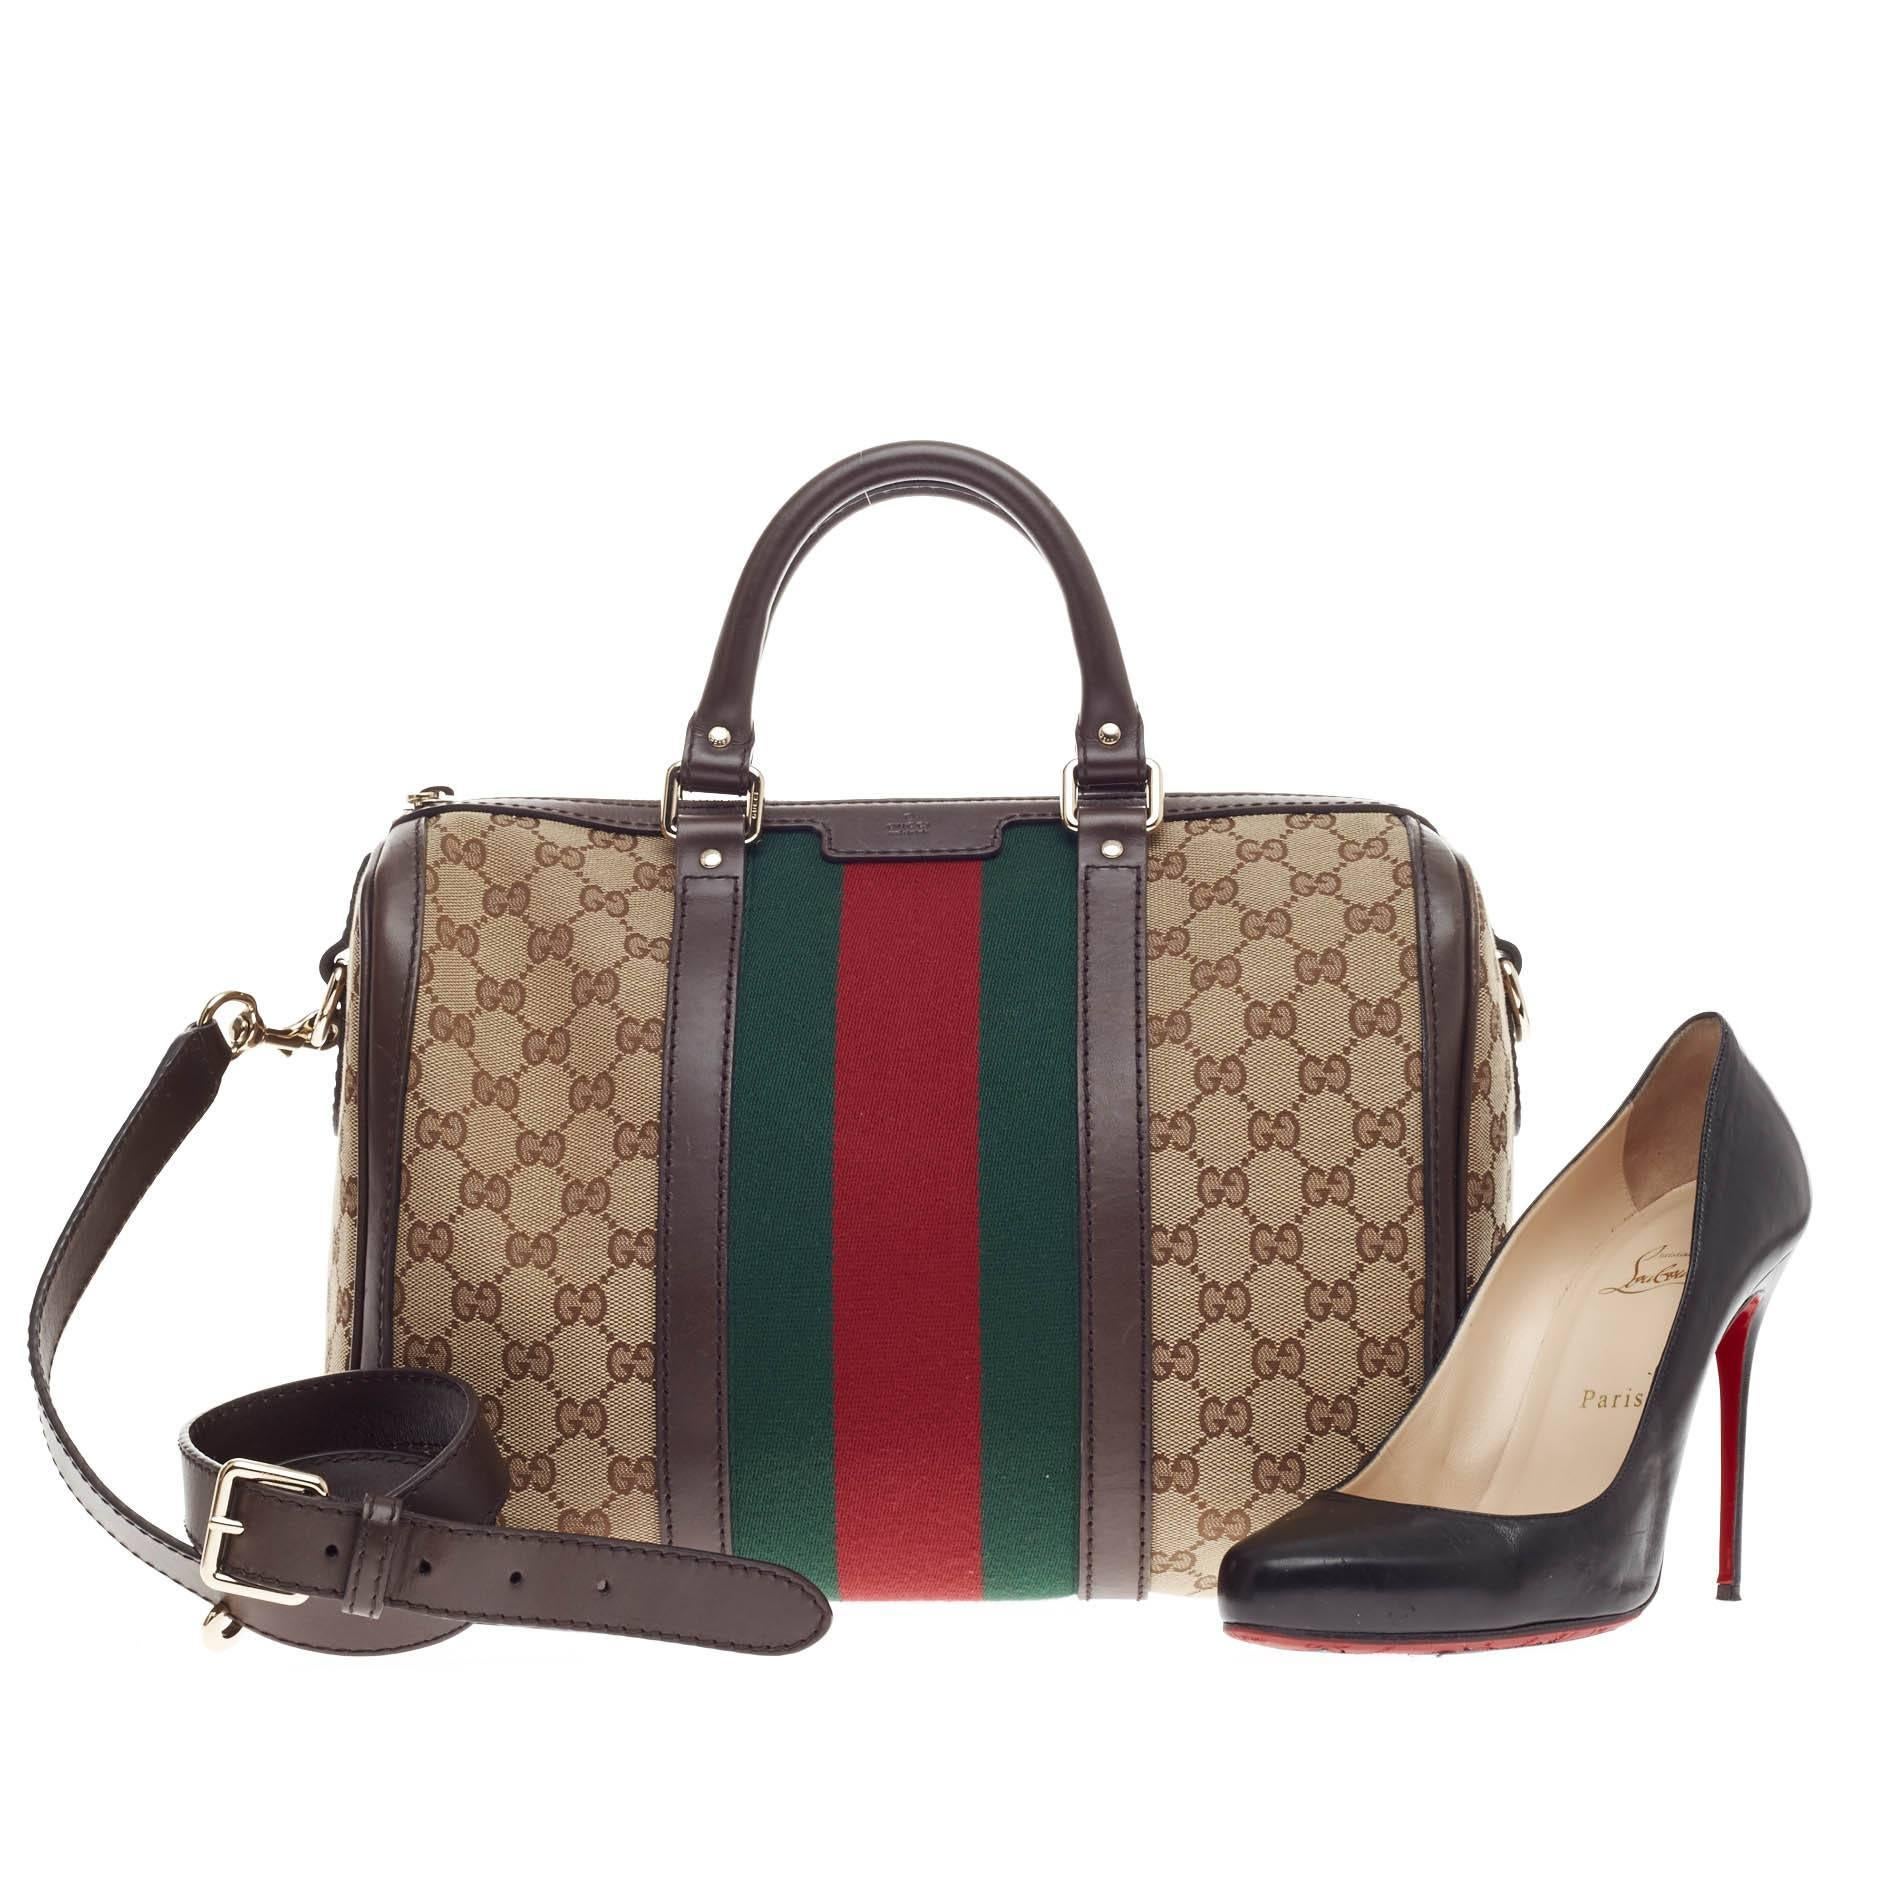 This authentic Gucci Vintage Web Boston Bag GG Canvas Medium is a recognizable classic. Crafted with brown GG canvas with signature green and red web stripes and leather trimmings, this bag features dual-rolled handles, protective base studs, and